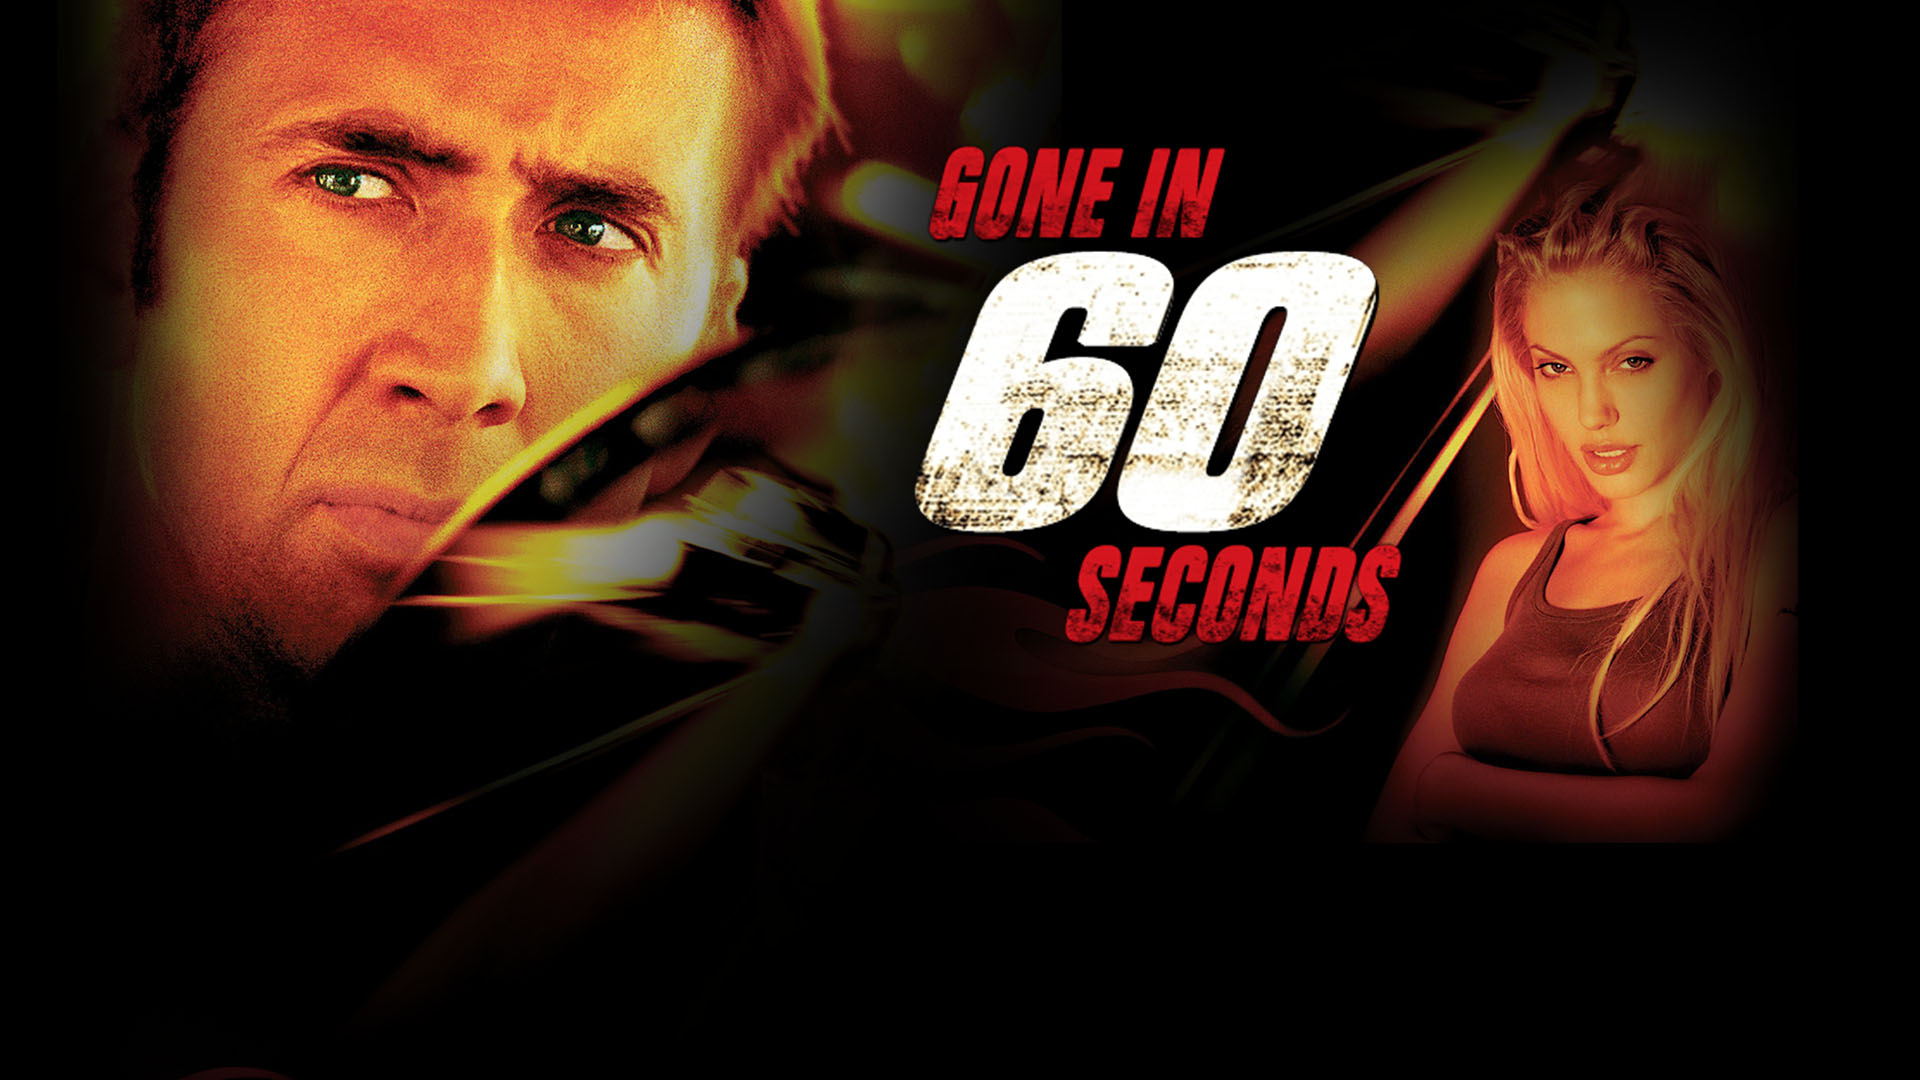 Watch Gone in 60 Seconds Online | Stream Full Movies